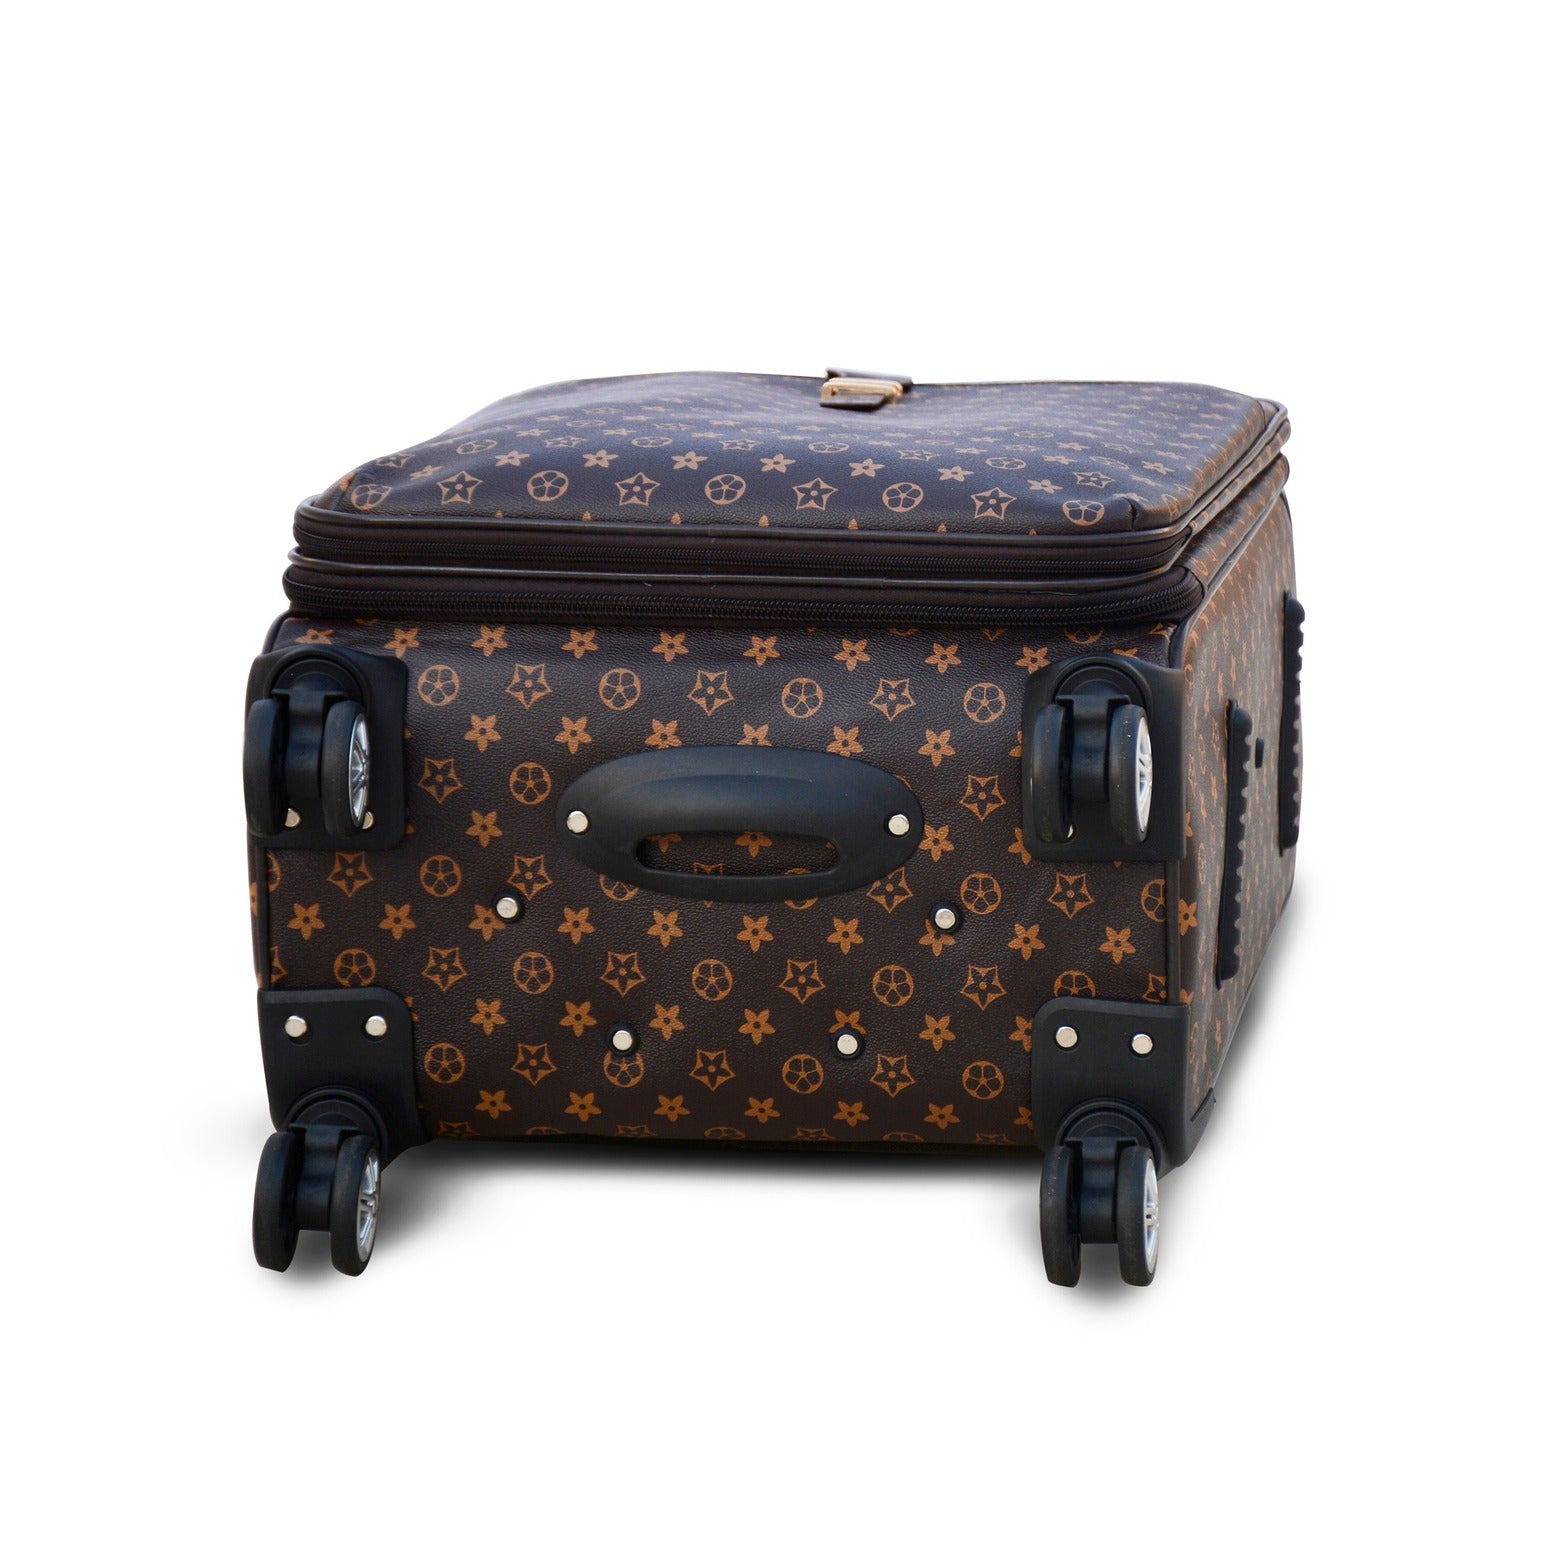 20" Brown Colour LVR PU Leather Luggage Lightweight Soft Material Carry On Trolley Bag with Spinner Wheel